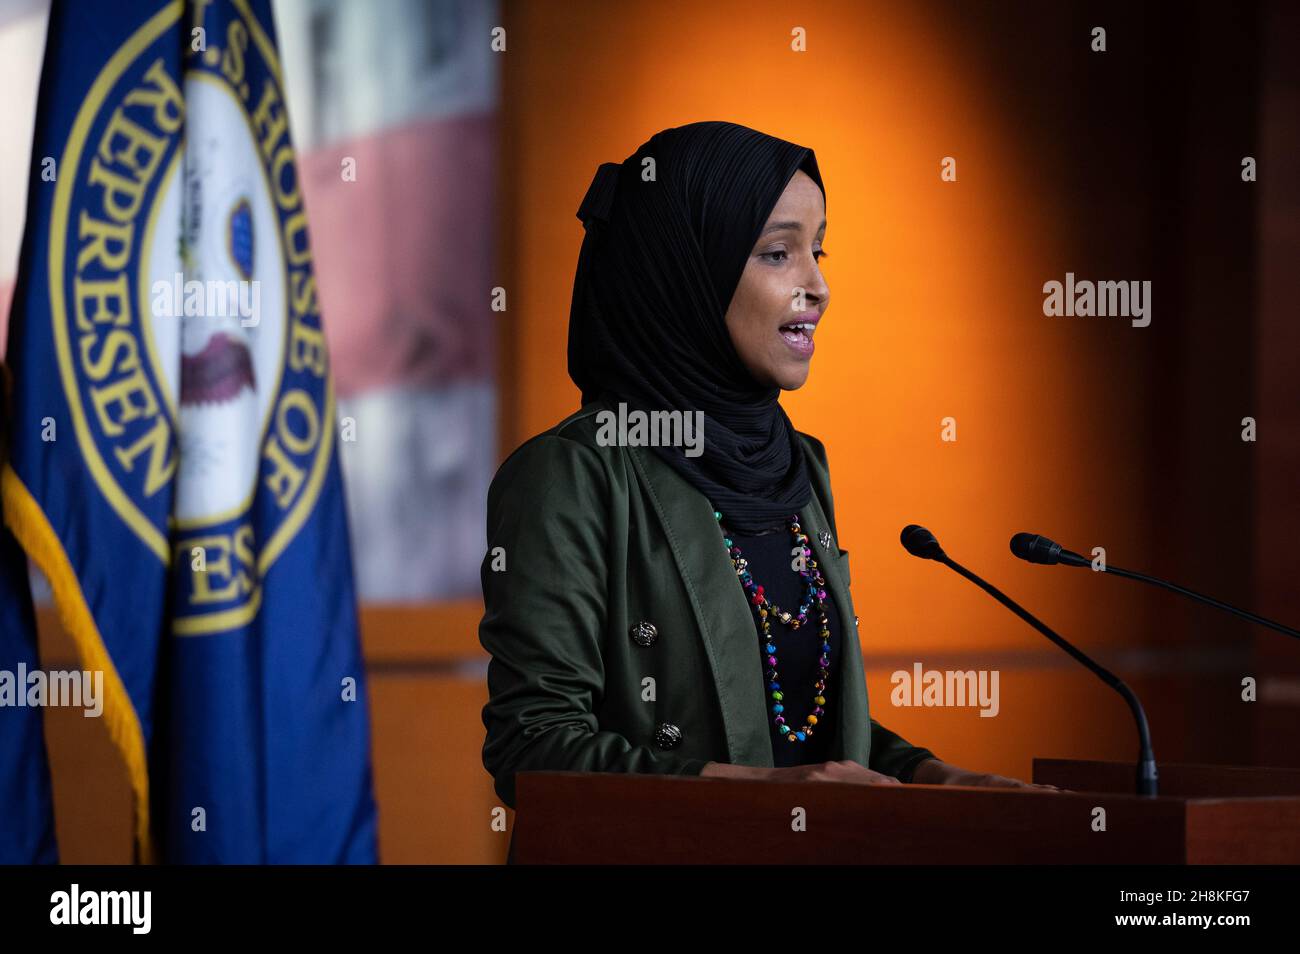 Representative Ilhan Omar (D-MN) speaks during a press conference on islamophobia, at the U.S. Capitol, in Washington, D.C., on Tuesday, November 30, 2021. Today in Congress, Treasury Secretary Janet Yellen urged lawmakers to raise the debt limit, as President Biden traveled to Minnesota to speak about infrastructure at a technical college. (Graeme Sloan/Sipa USA) Stock Photo